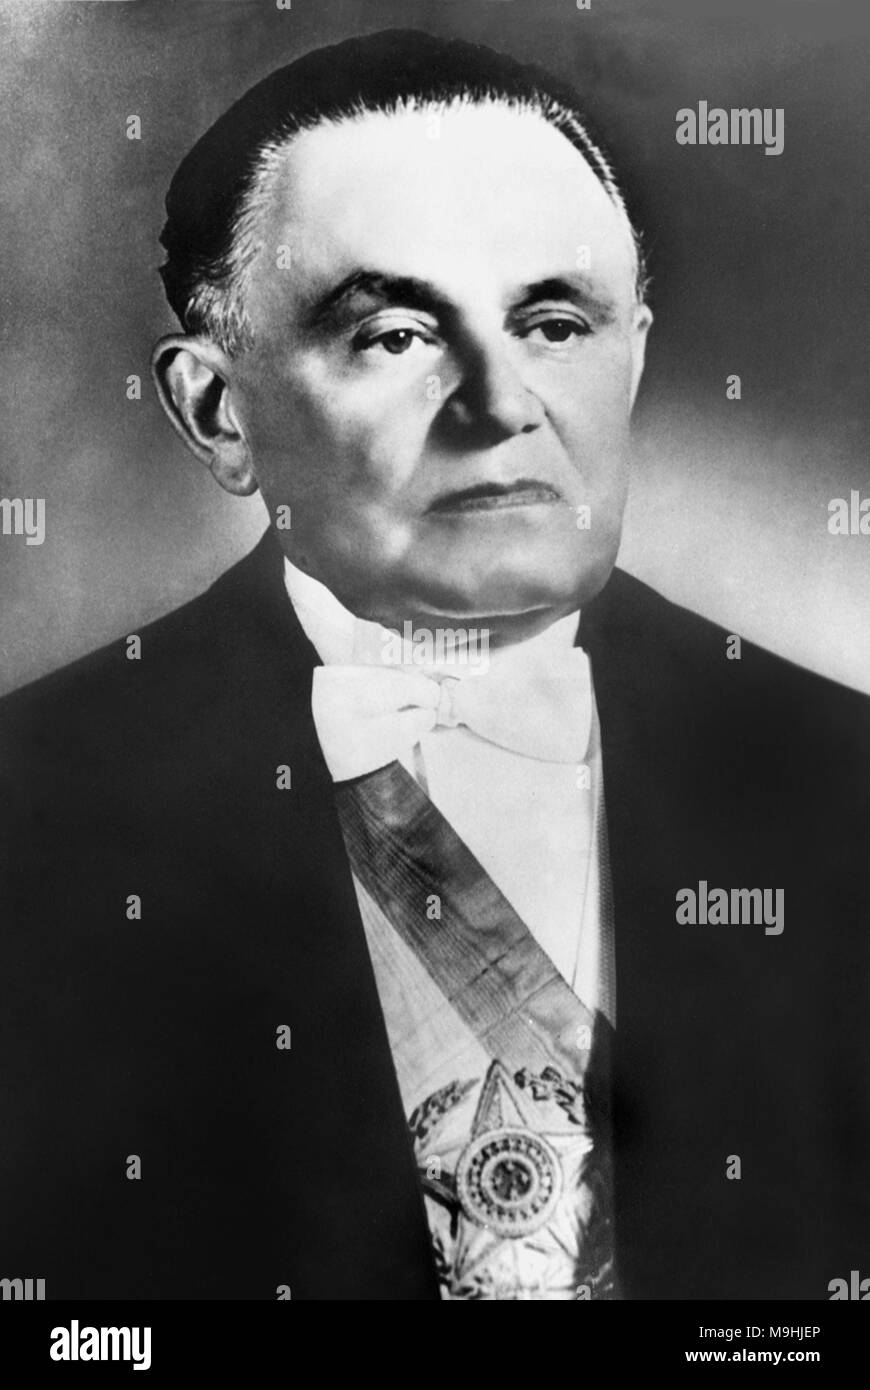 Humberto de Alencar Castelo Branco (1897 – 1967) Brazilian military leader and politician. He served as President of the Brazilian military government after the 1964 military coup d'etat. Stock Photo